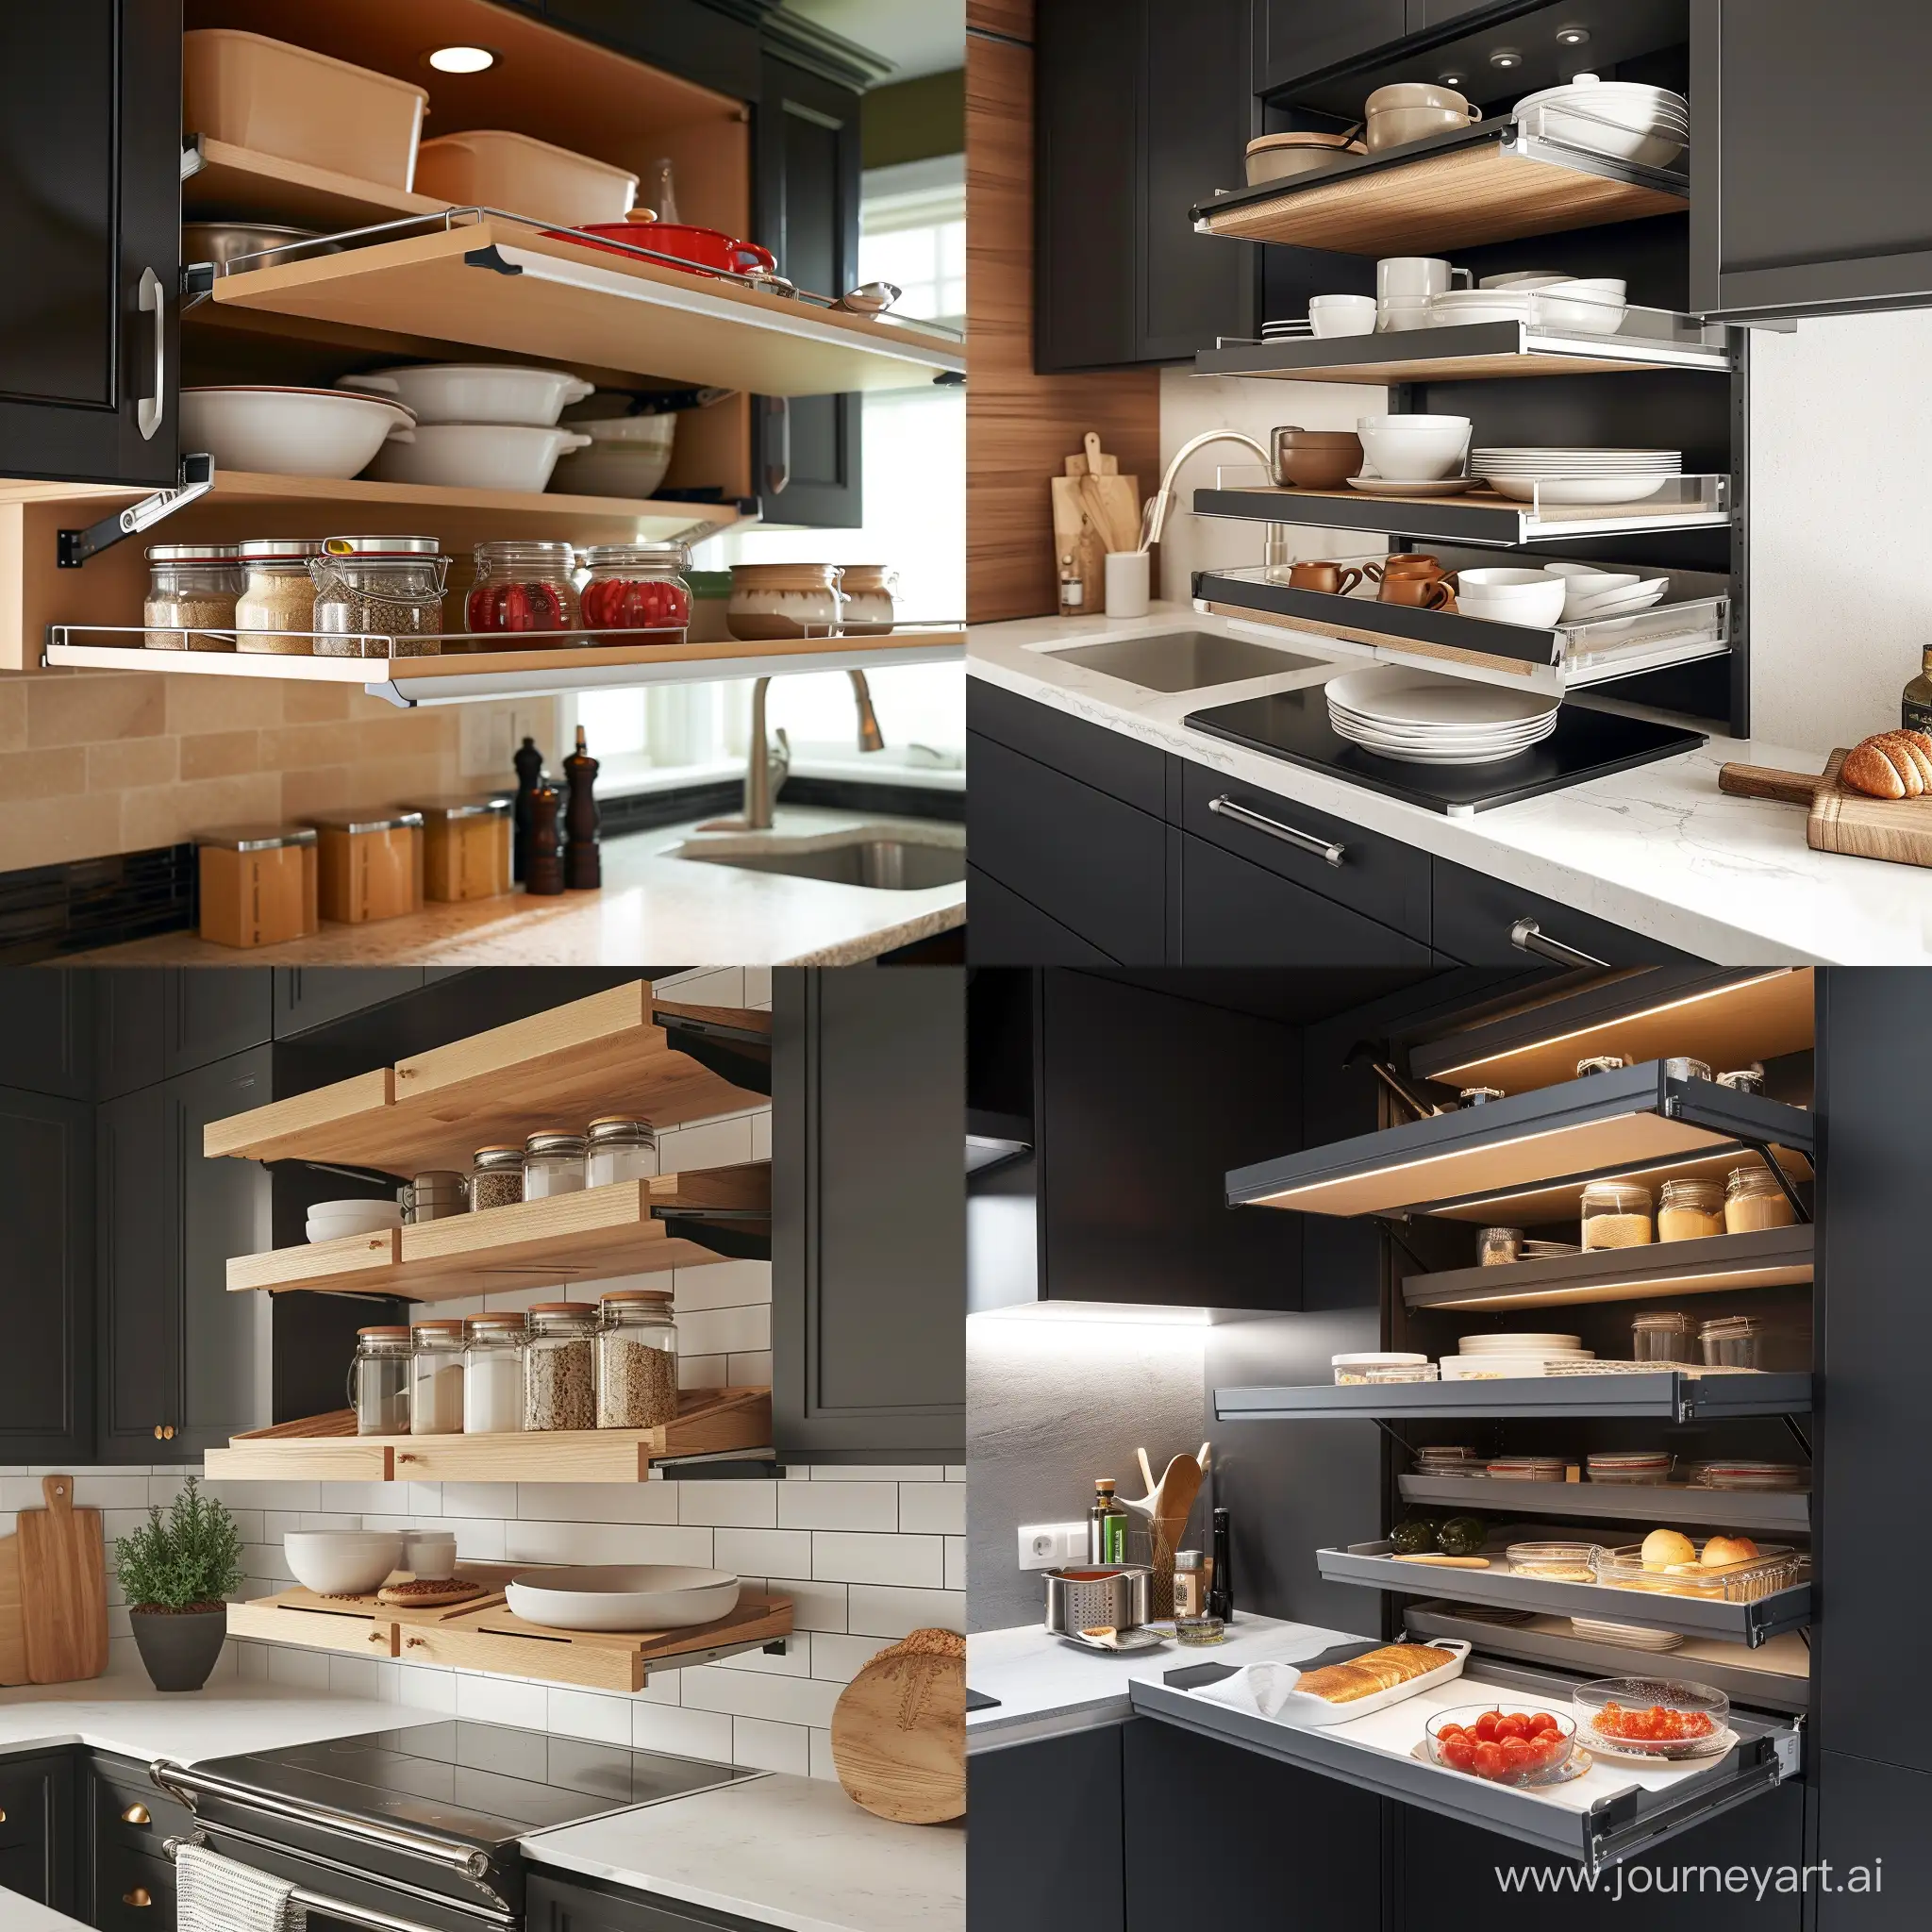 Overhead Kitchen Storage - Glide-Out Shelves